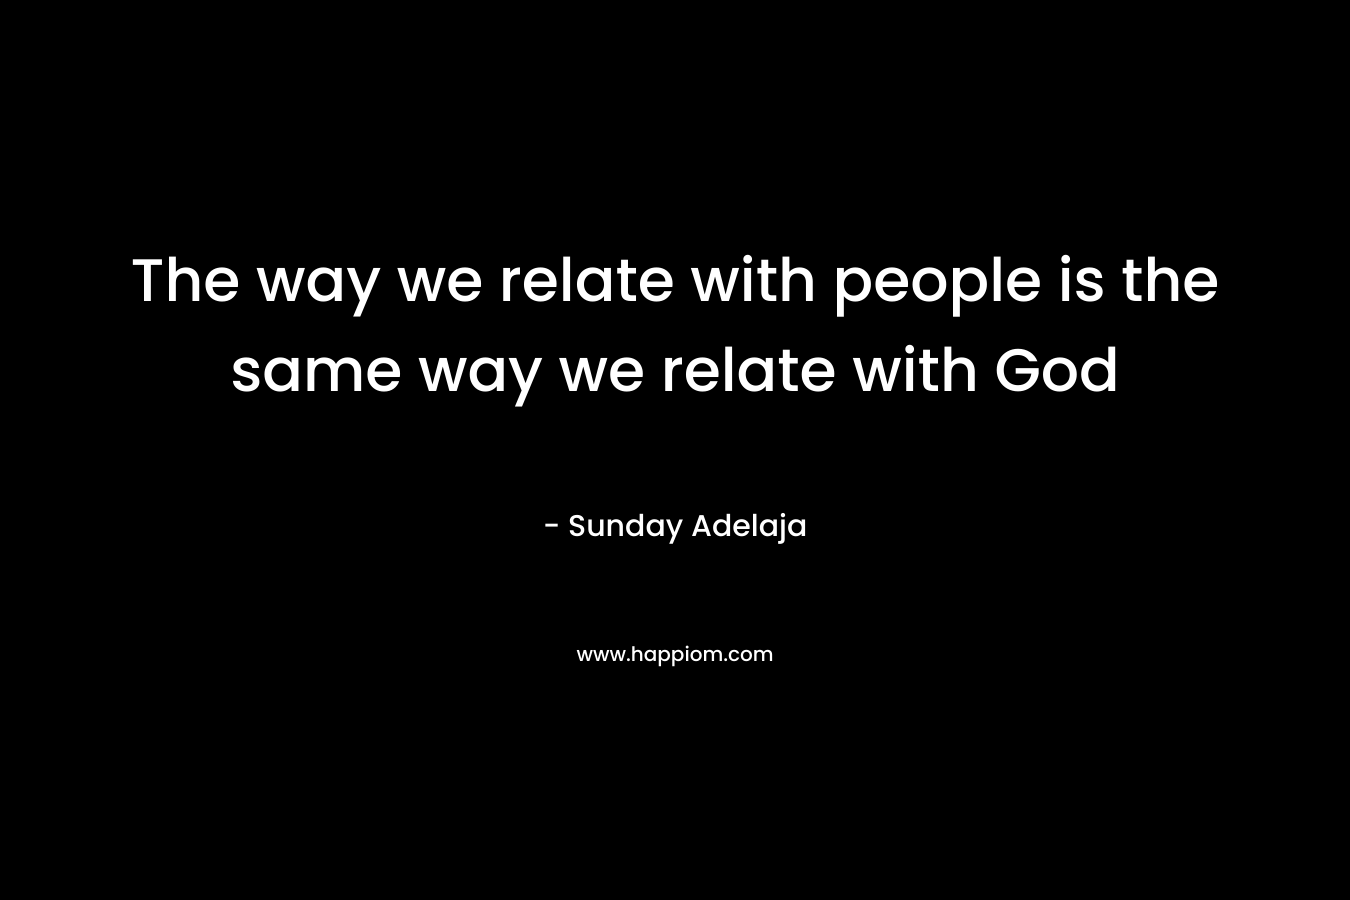 The way we relate with people is the same way we relate with God